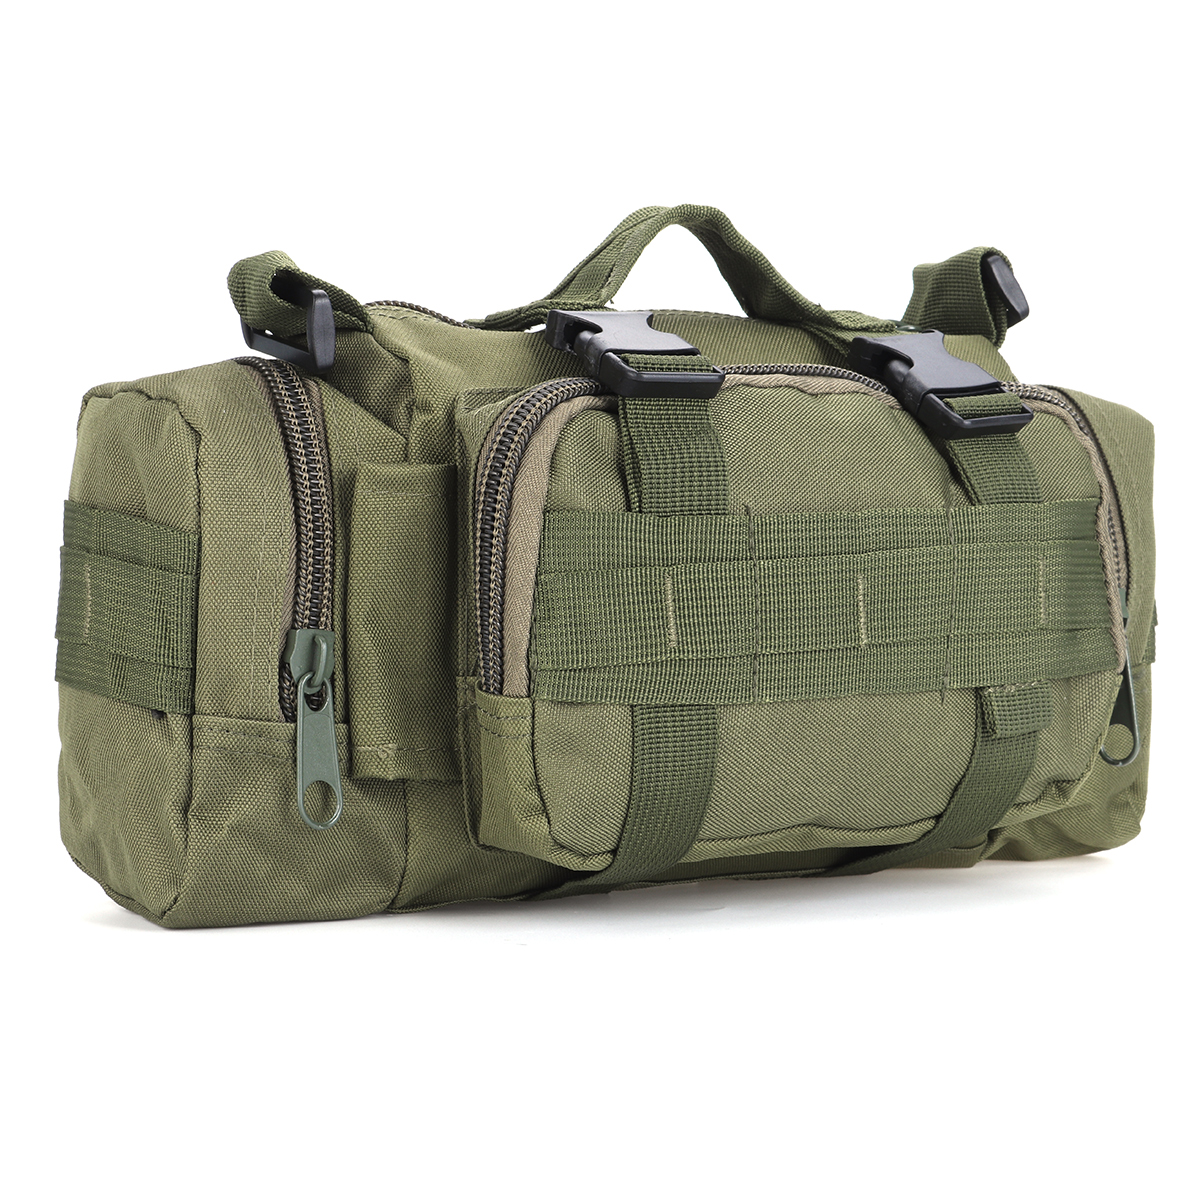 Multifunctional-Outdoor-Sports-Hiking-with-Zippers-Nylon-Oxford-Cloth-Tactical-Shoulder-Bag-Waist-Pa-1825563-3